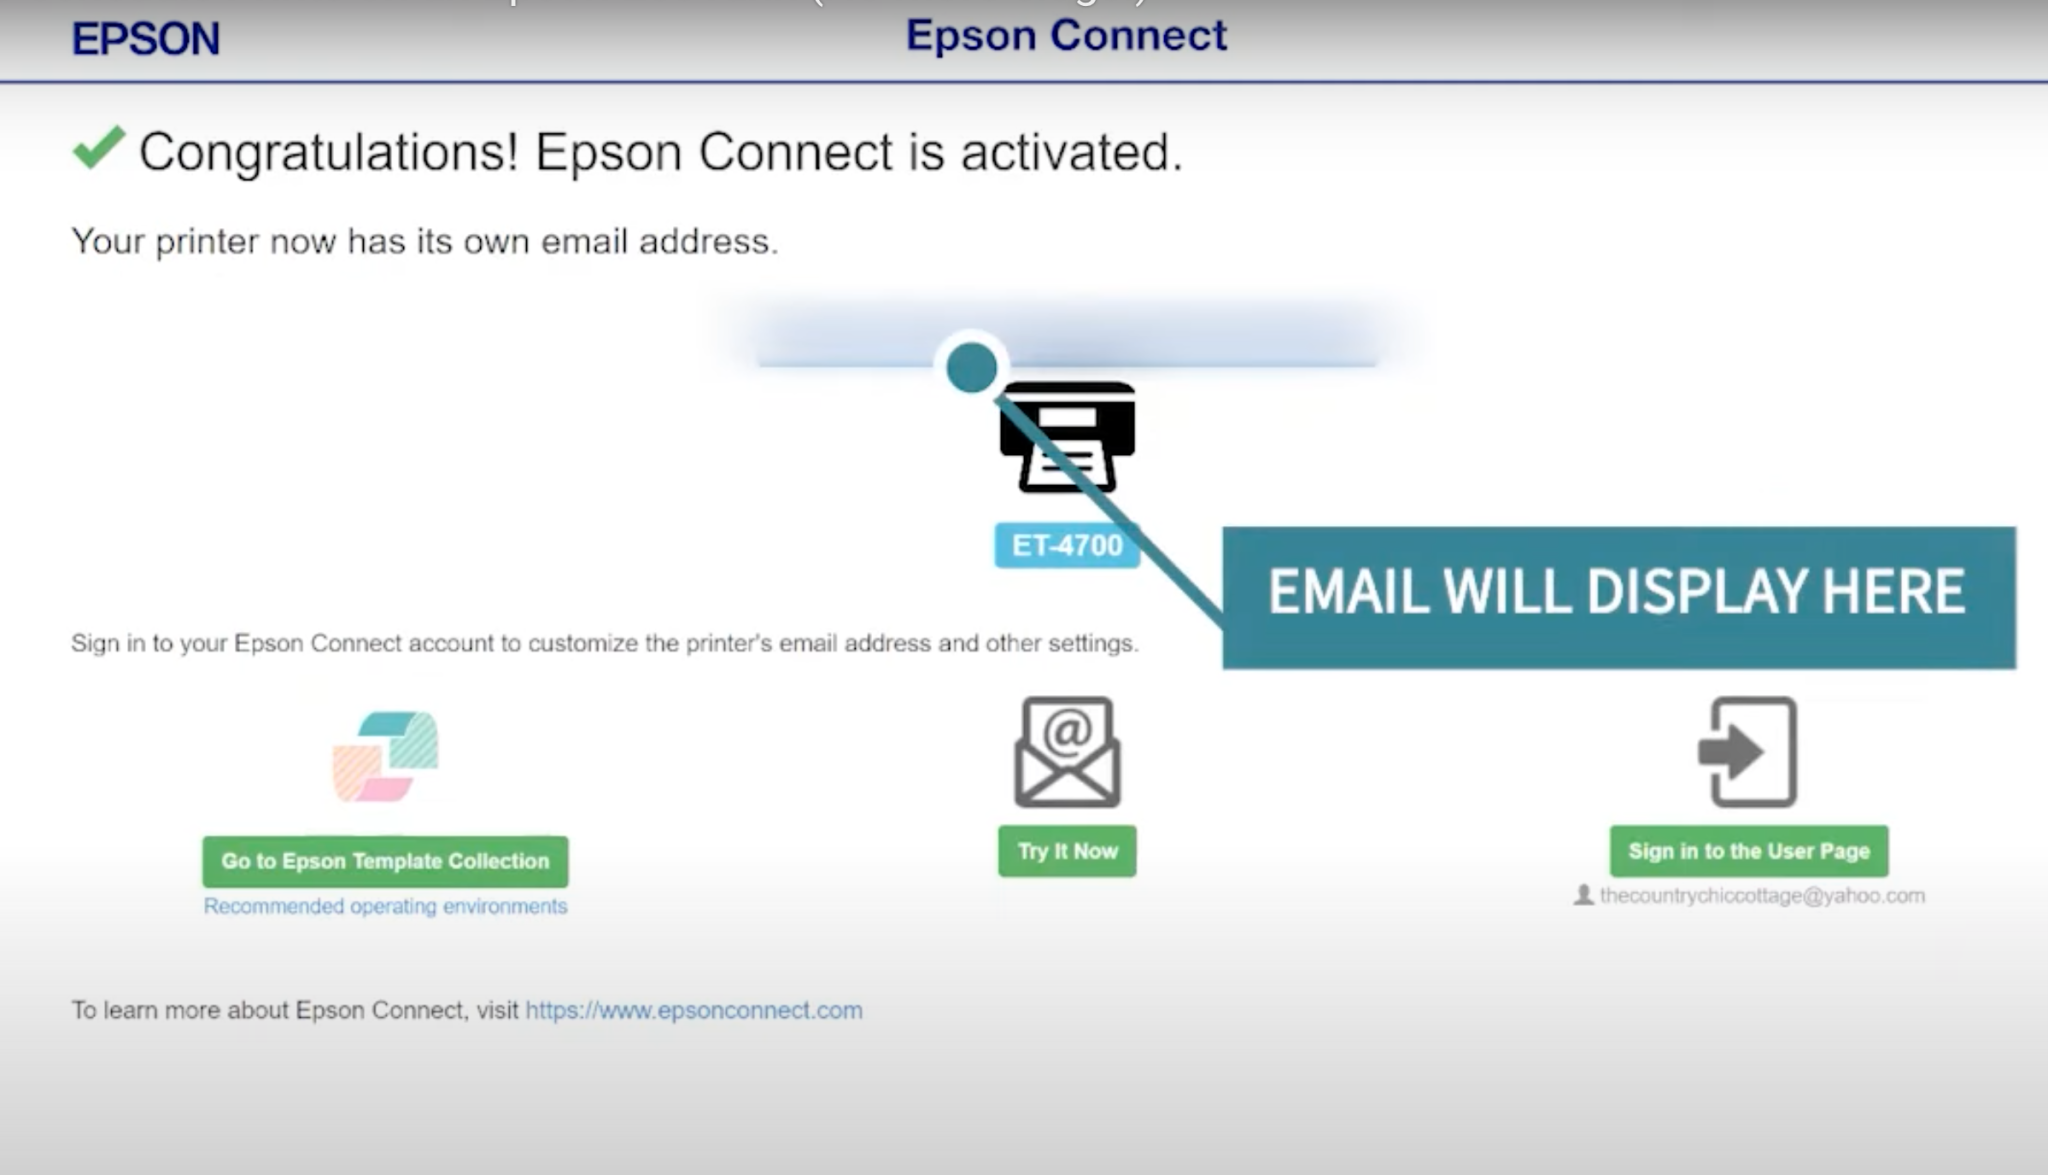 Epson Connect is activated confirmation page.